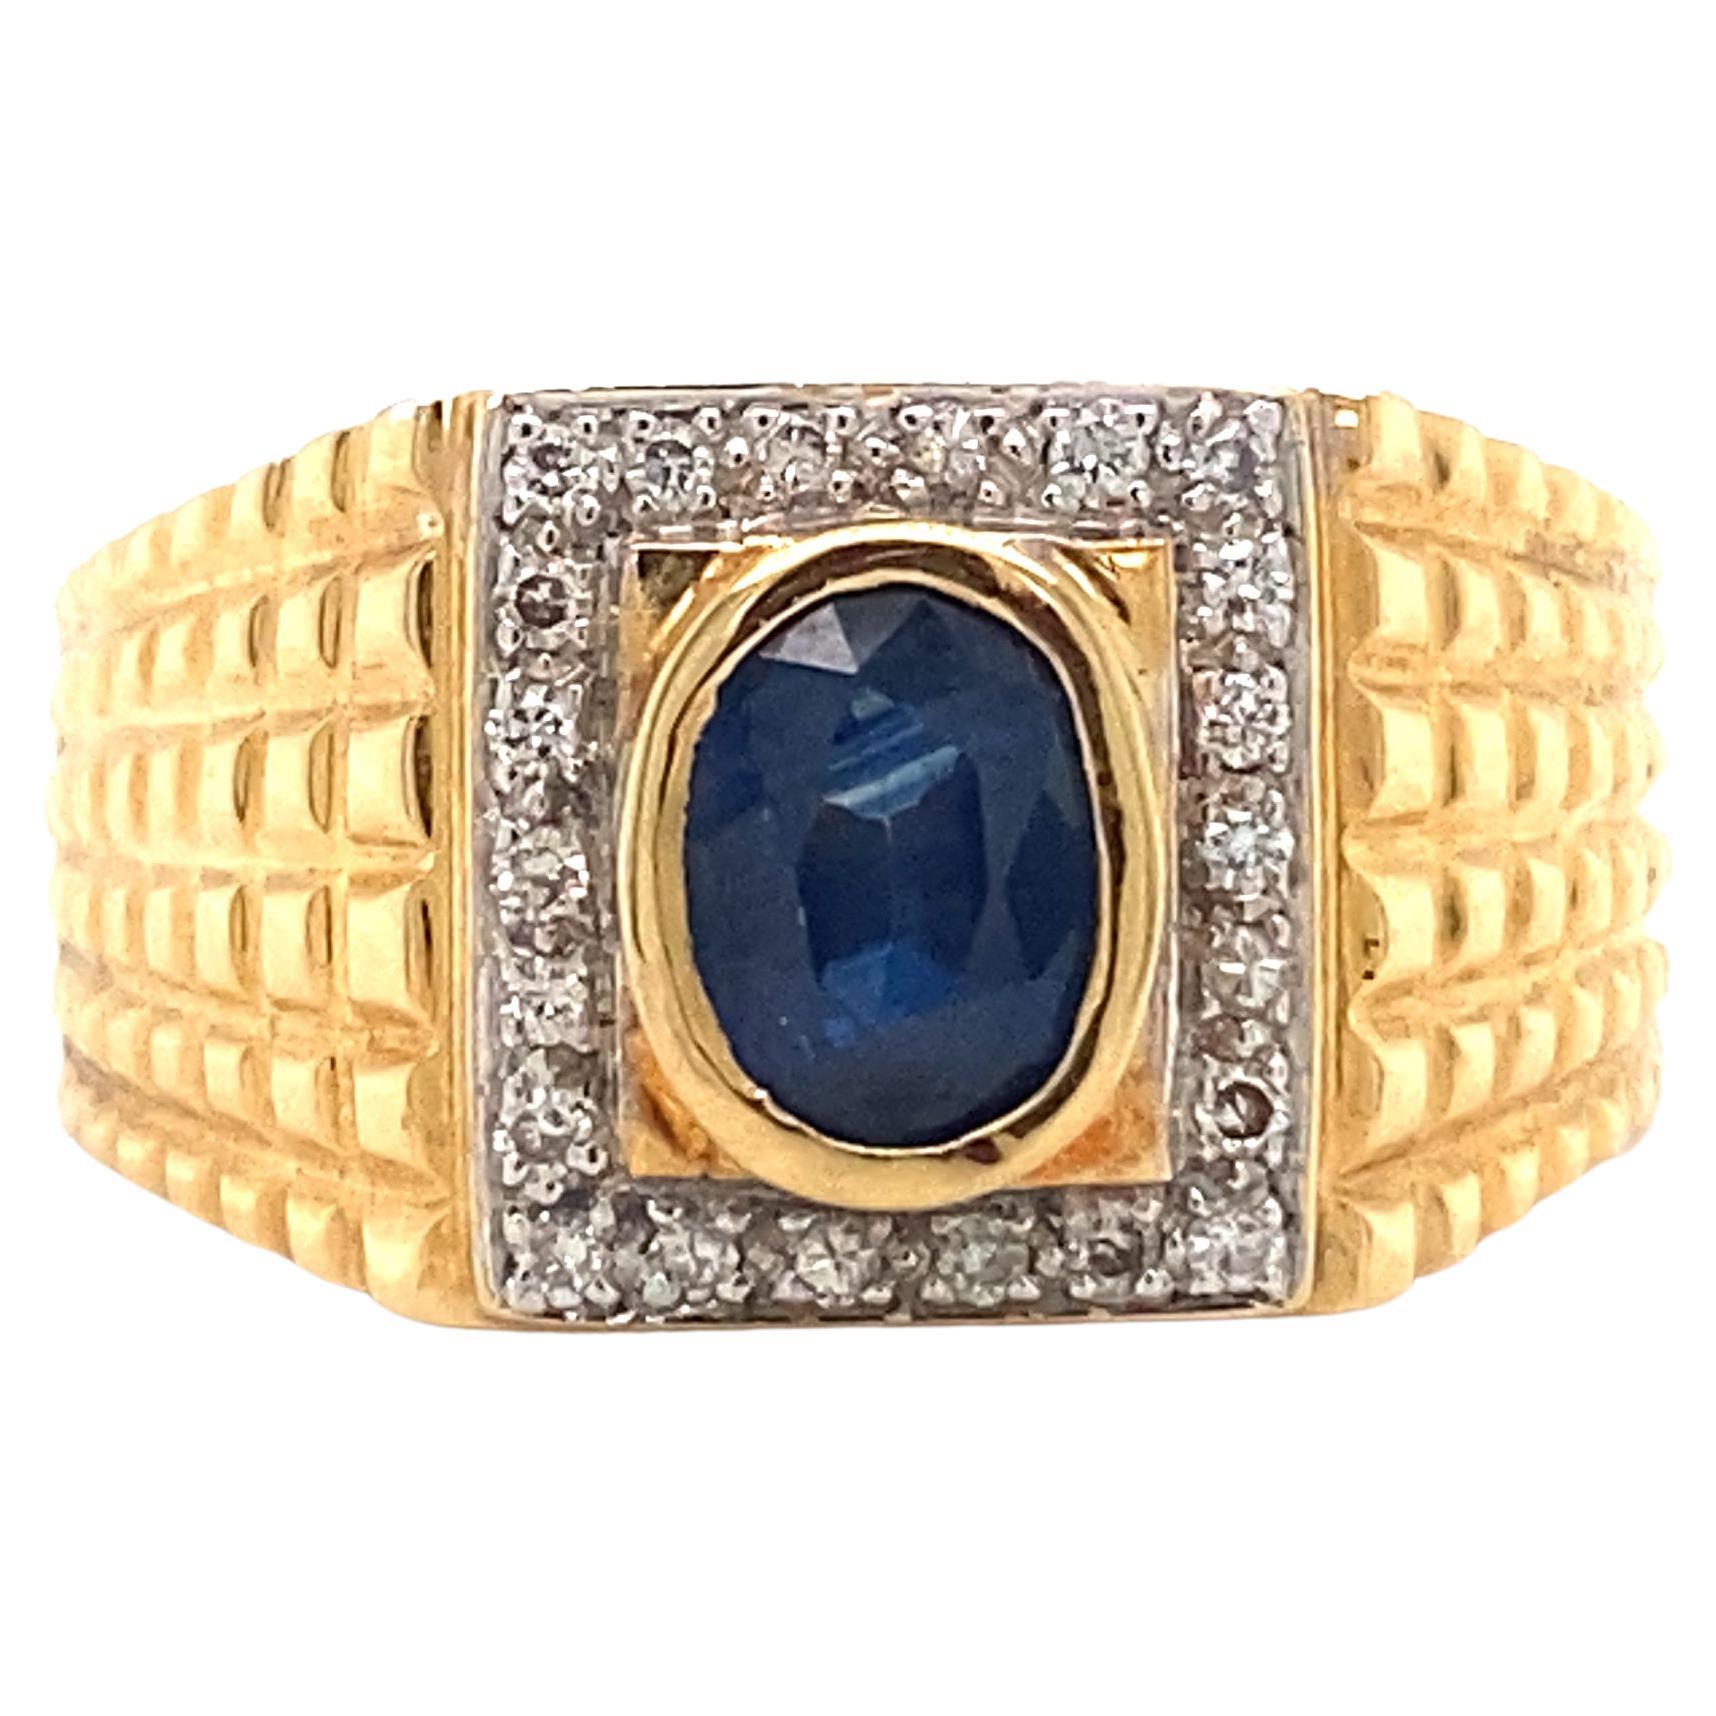 Circa 1990's Le Vian Sapphire and Diamond Ring Set in 18 Karat Yellow Gold For Sale